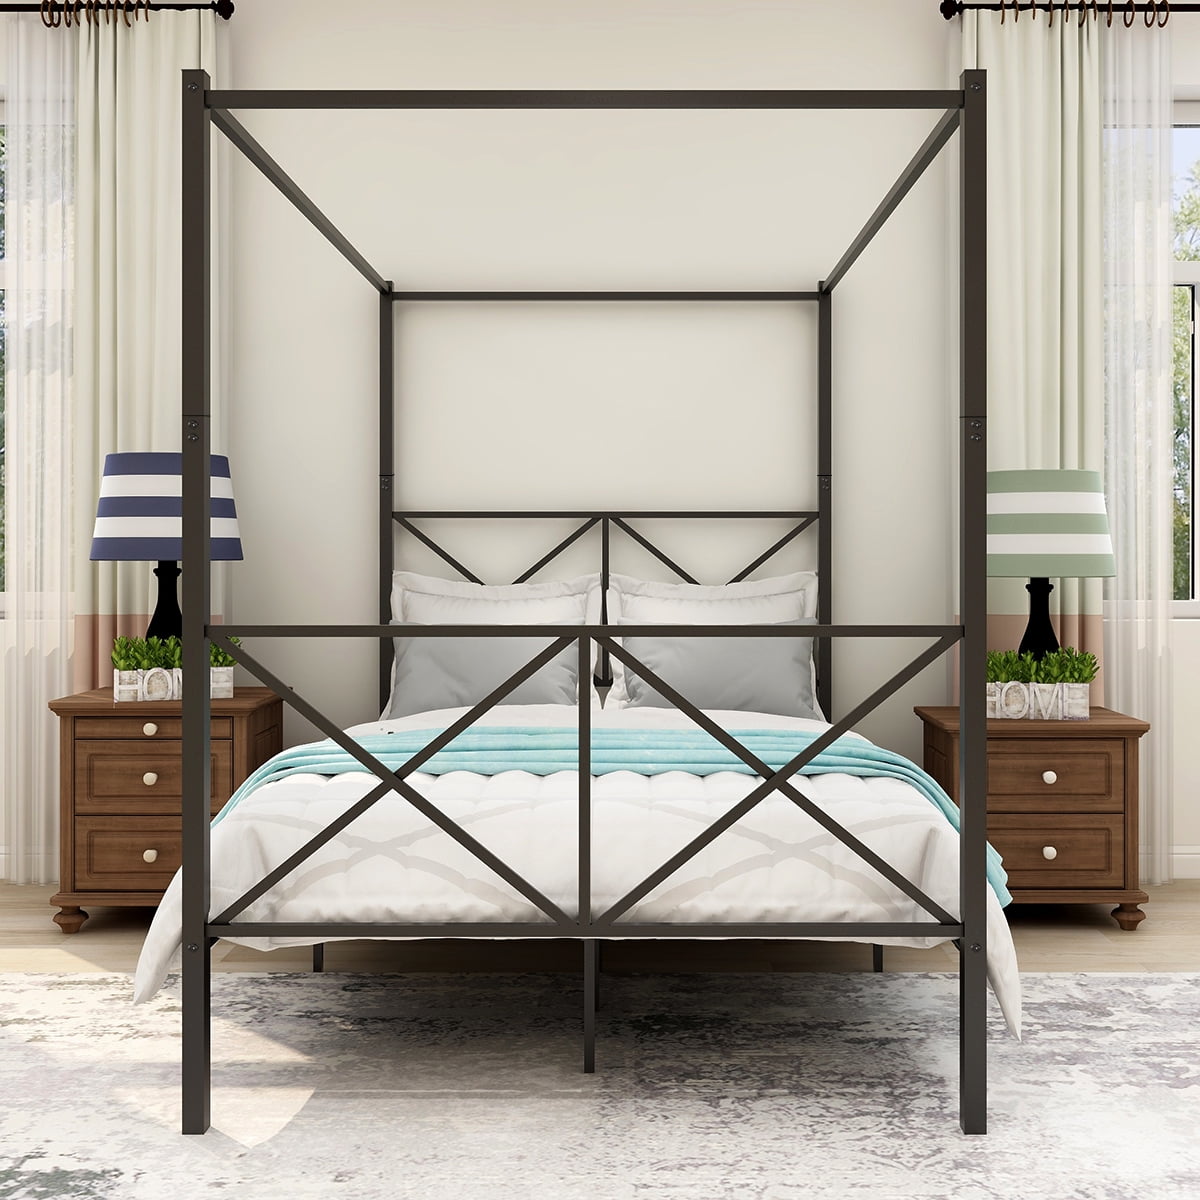 4 Post Metal Canopy Bed With Headboard, King Size Canopy Bed With Storage